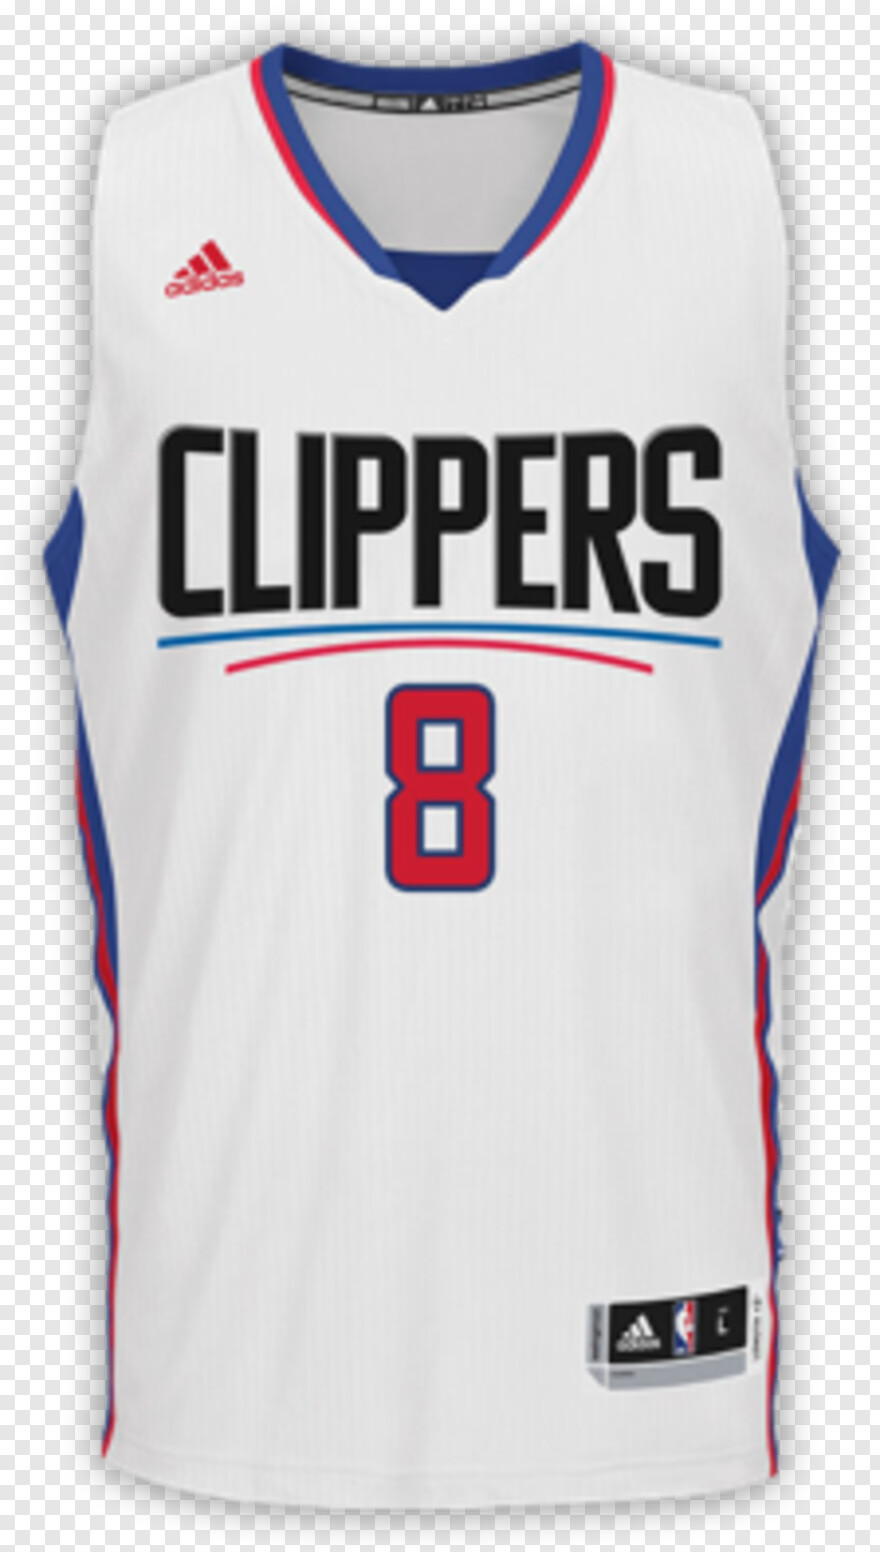 clippers-logo # 516729